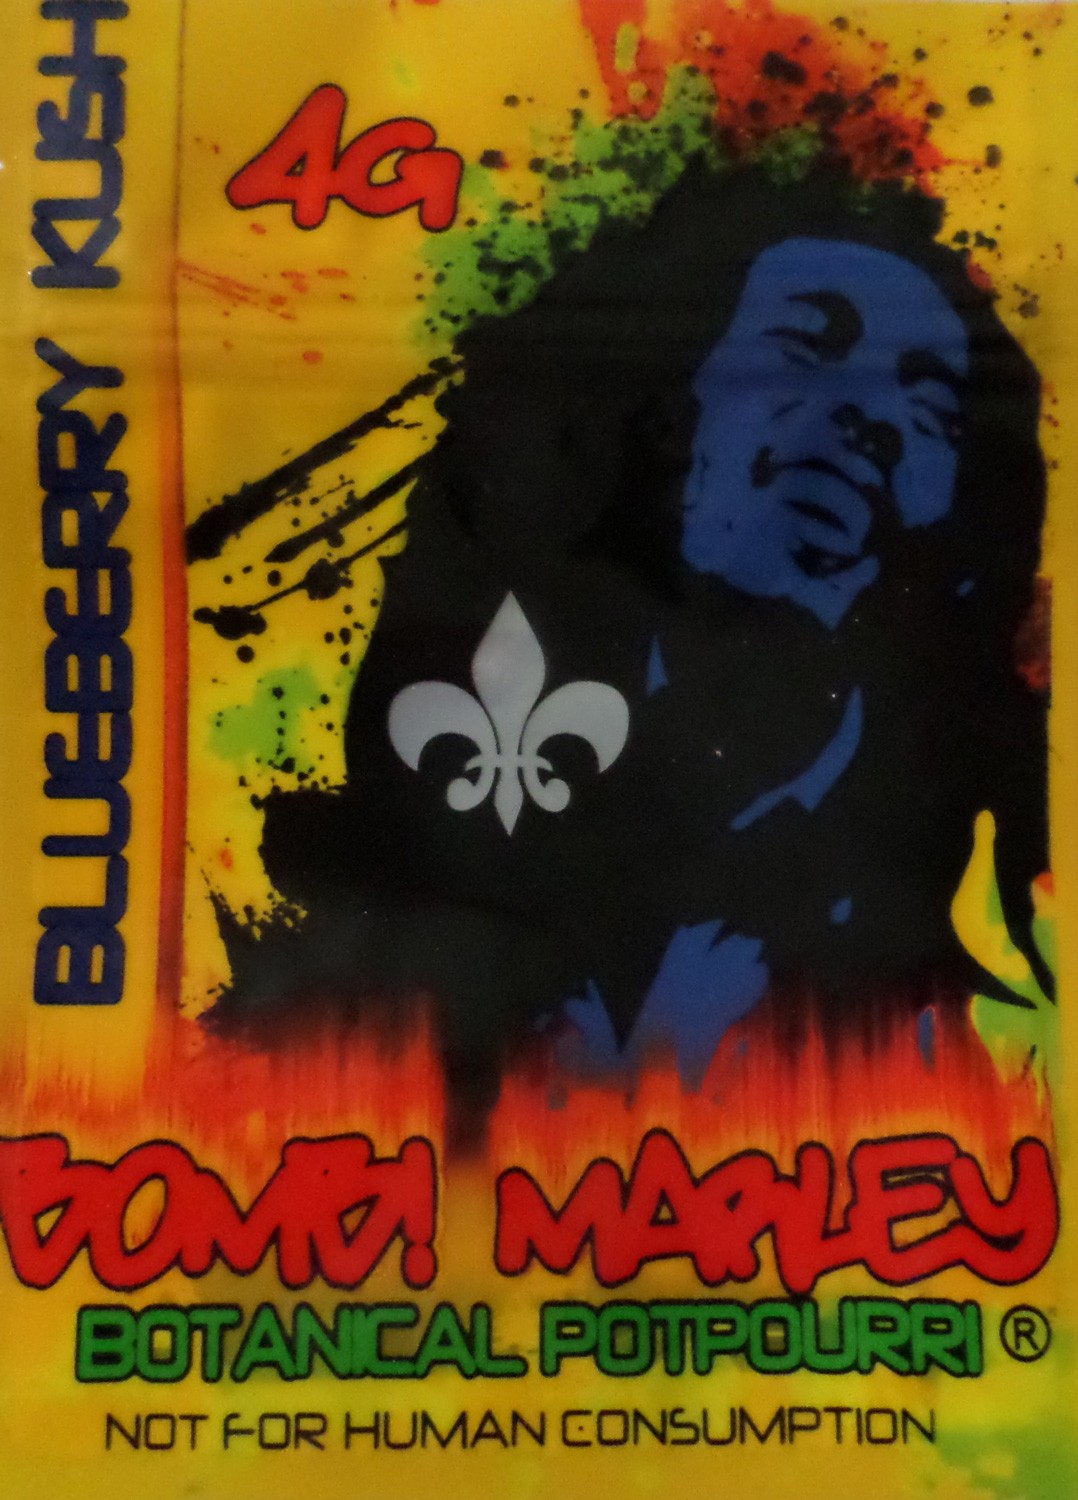 Bomb Marley 4g incense 3x pack